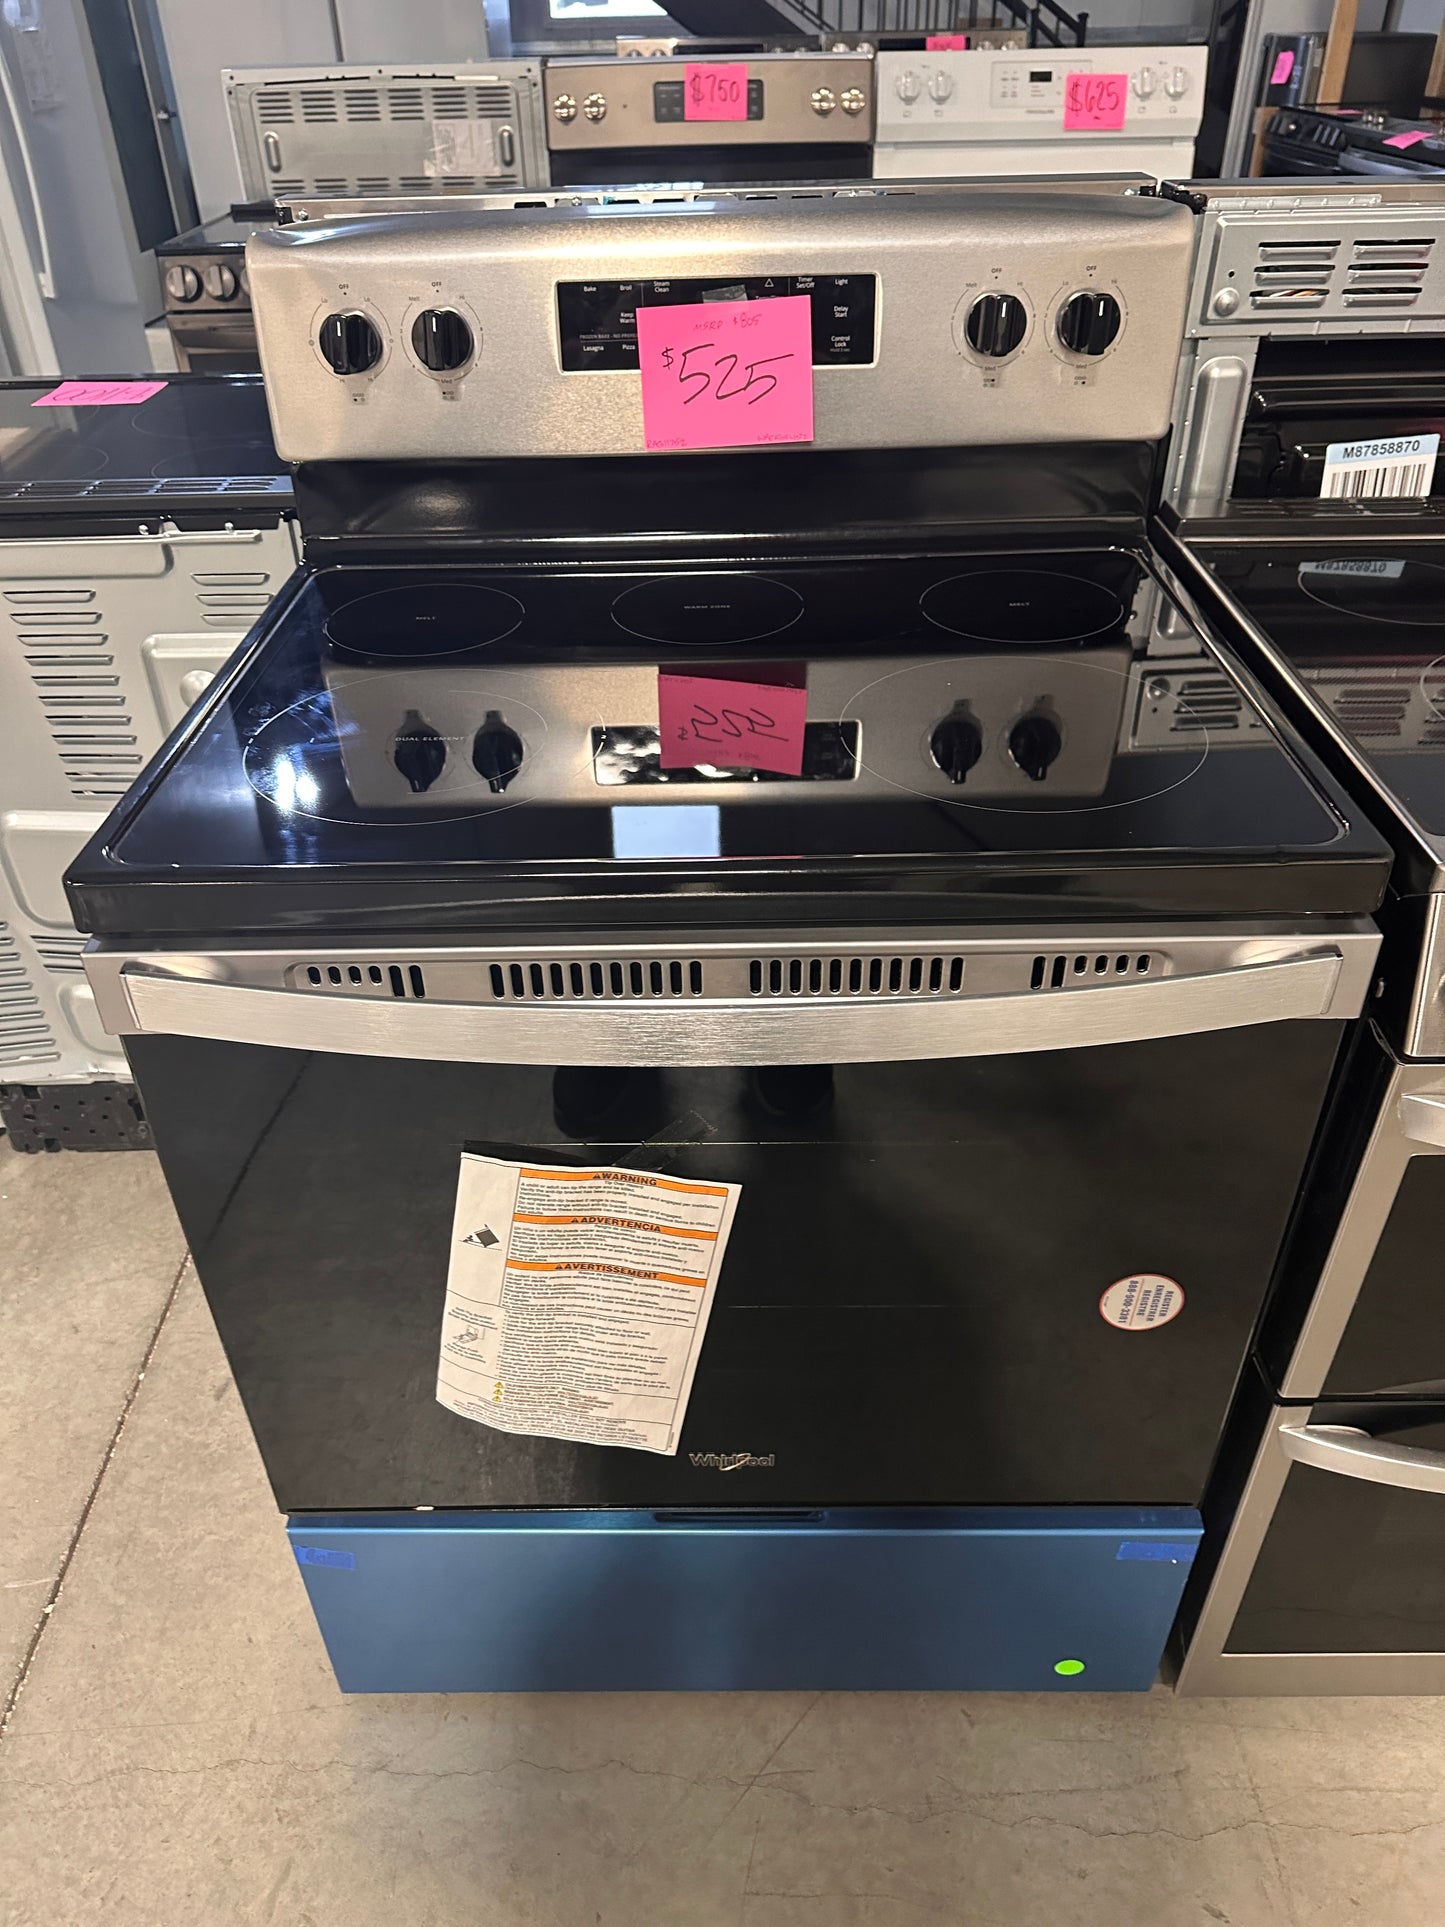 NEW ELECTRIC RANGE with SELF CLEANING and FROZEN BAKE - RAG11752 - WFE505W0JZ